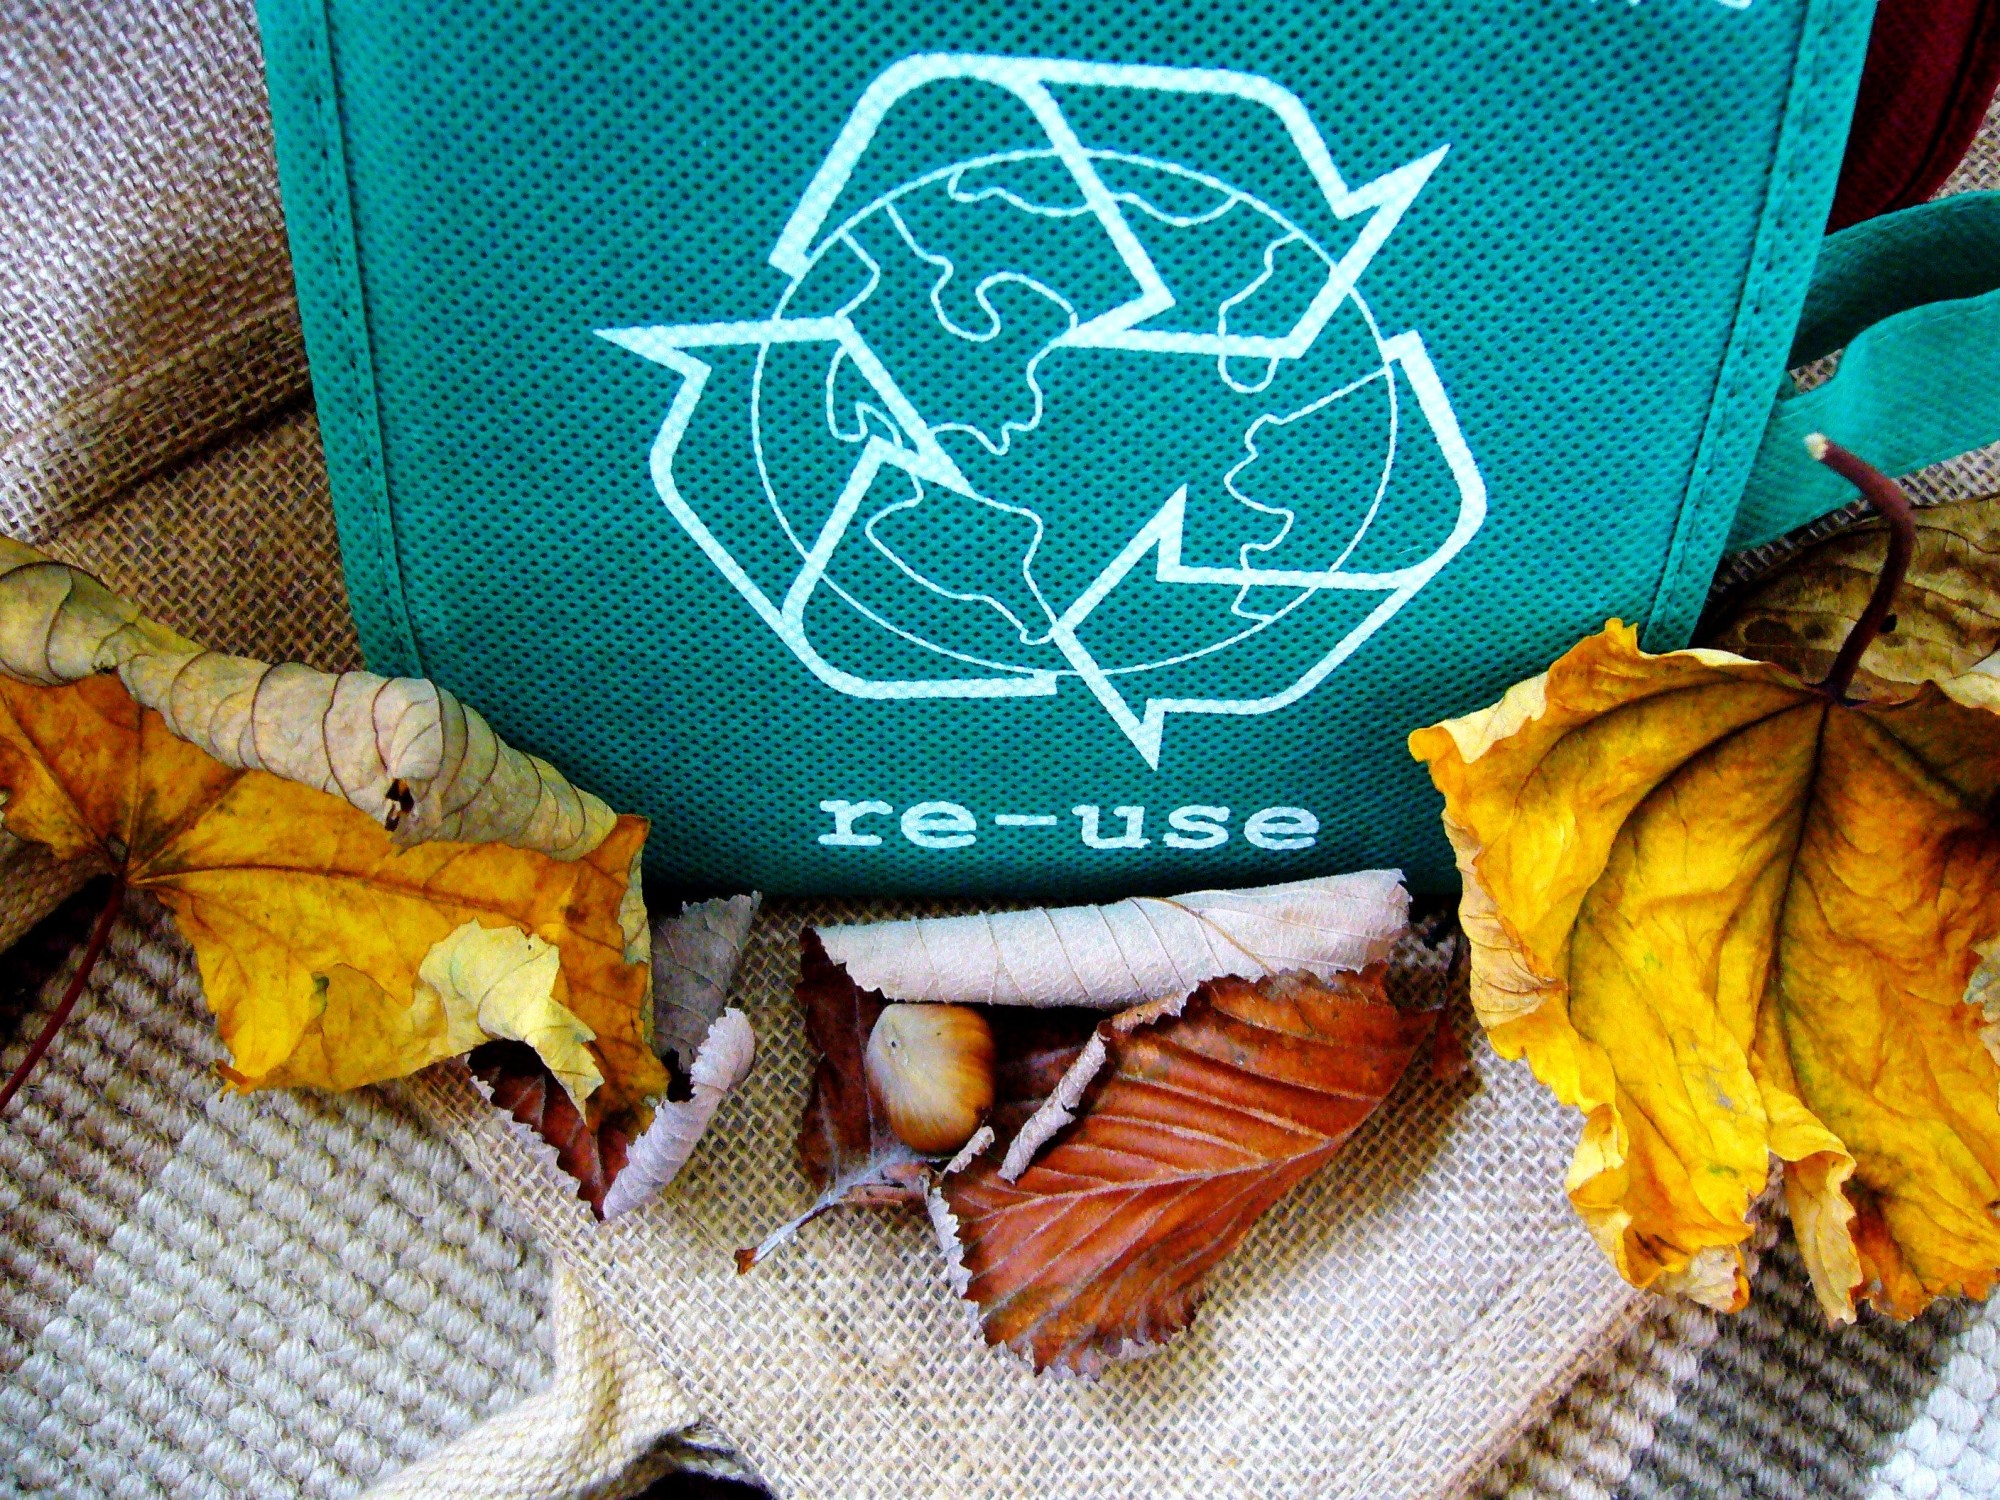 How to Start Recycling: 3 Key Recycling Tips Everyone Should Know